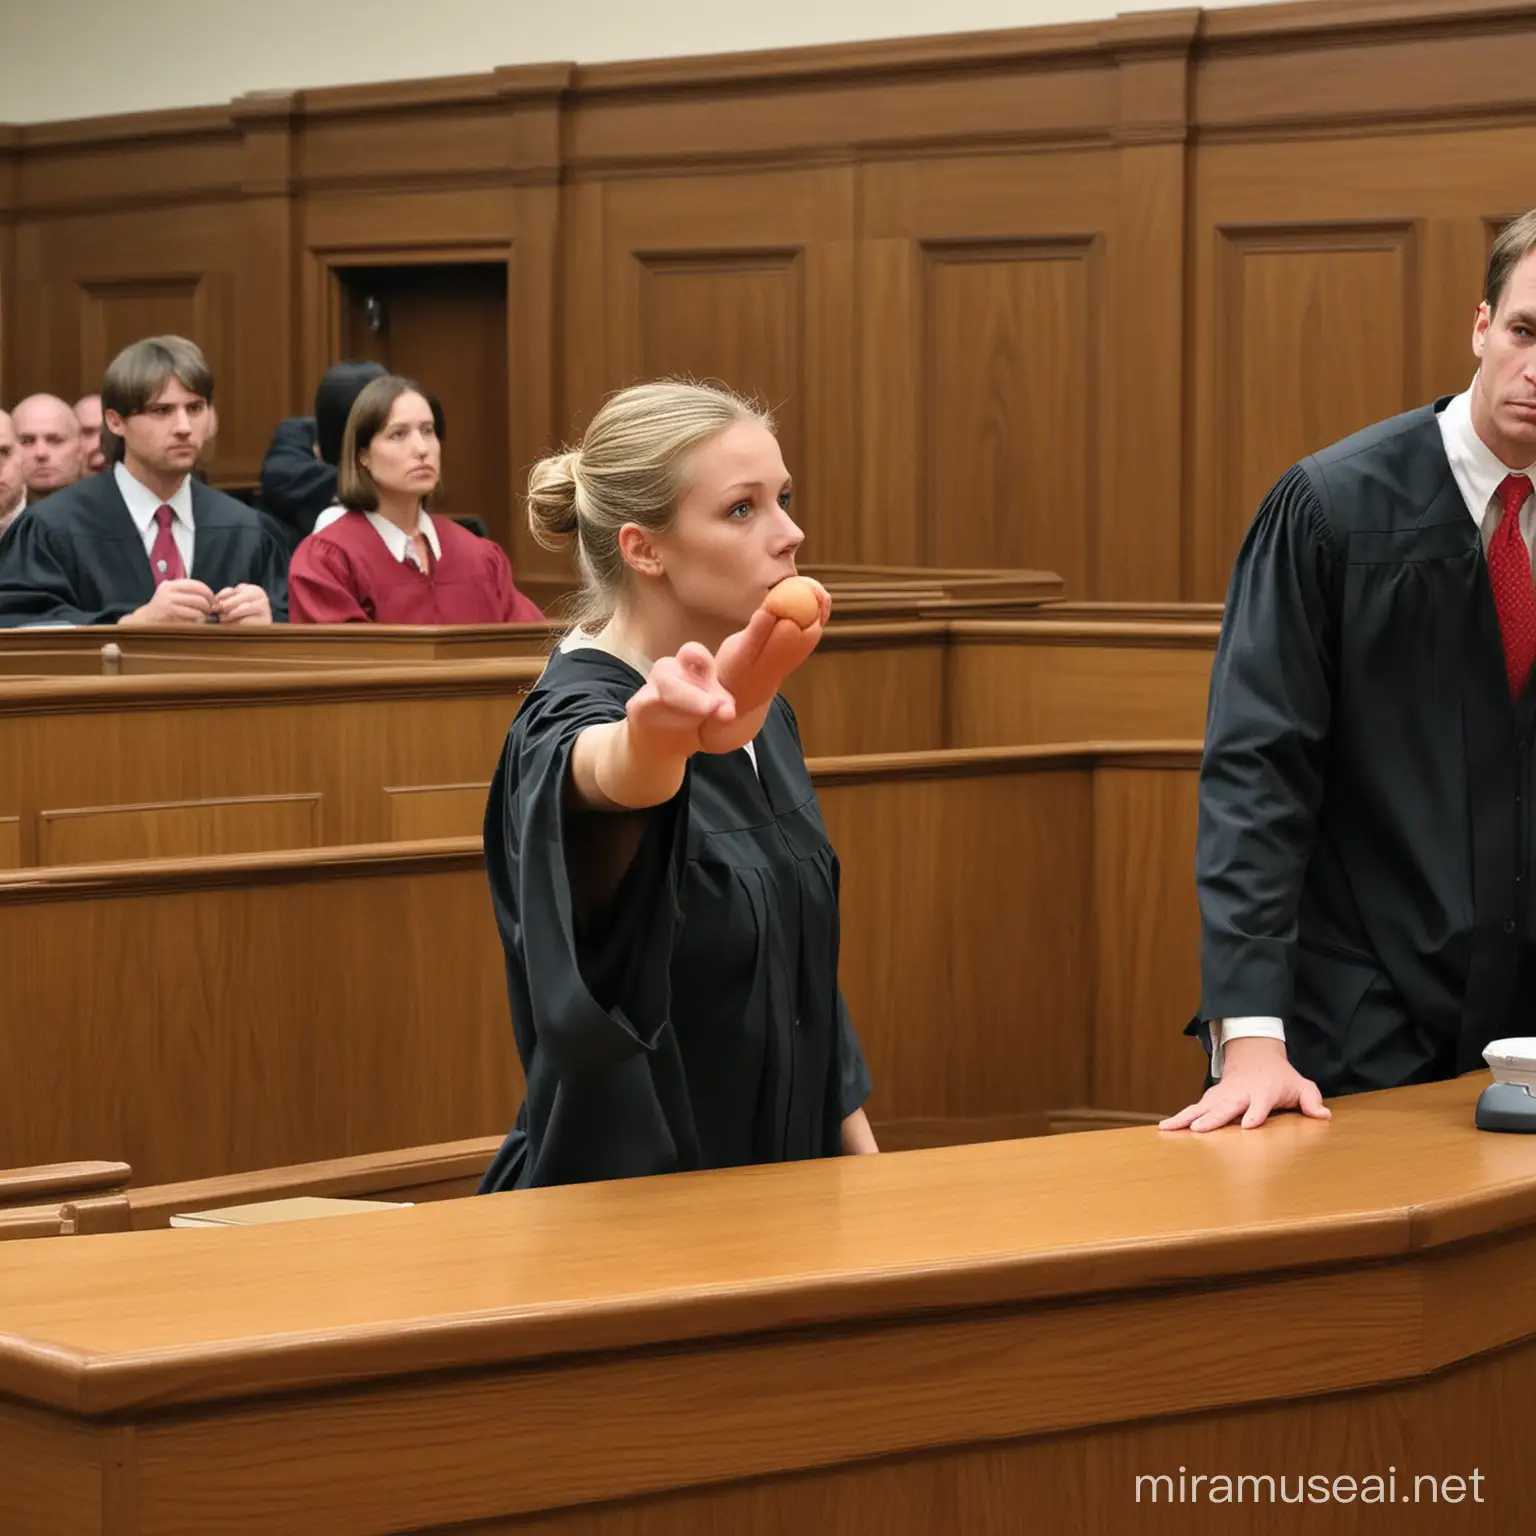 The Strangest Courtroom Moments of ALL TIME..”.